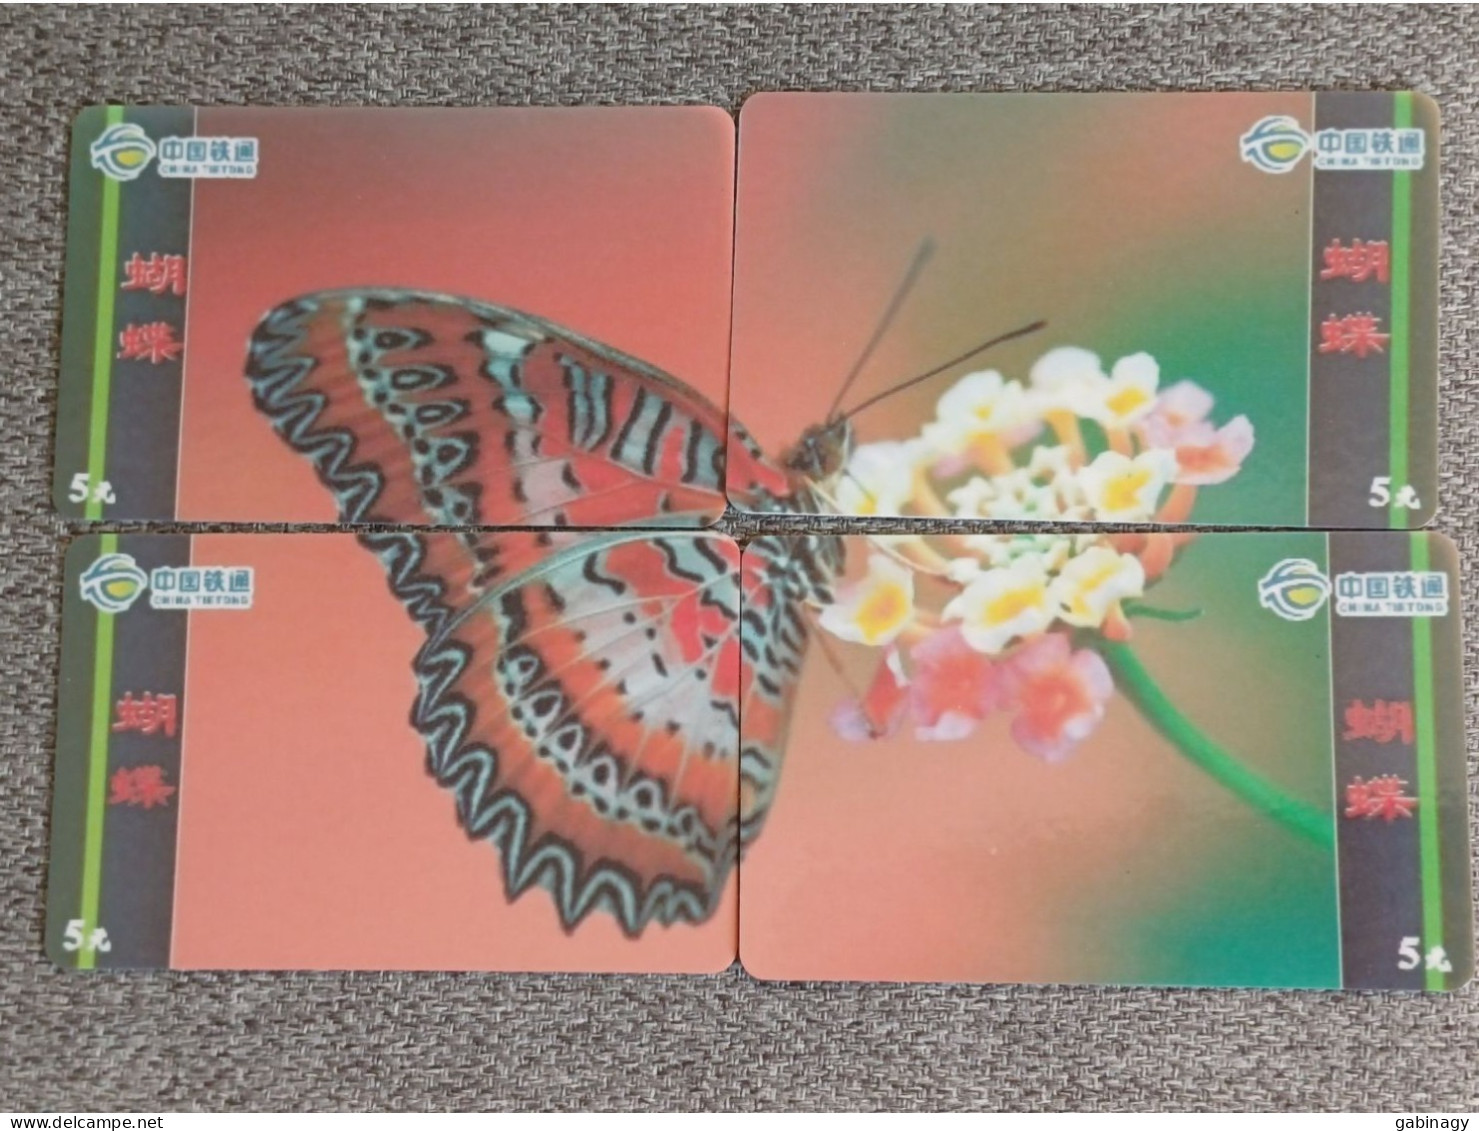 CHINA - BUTTERFLY-21 - PUZZLE SET OF 4 CARDS - China